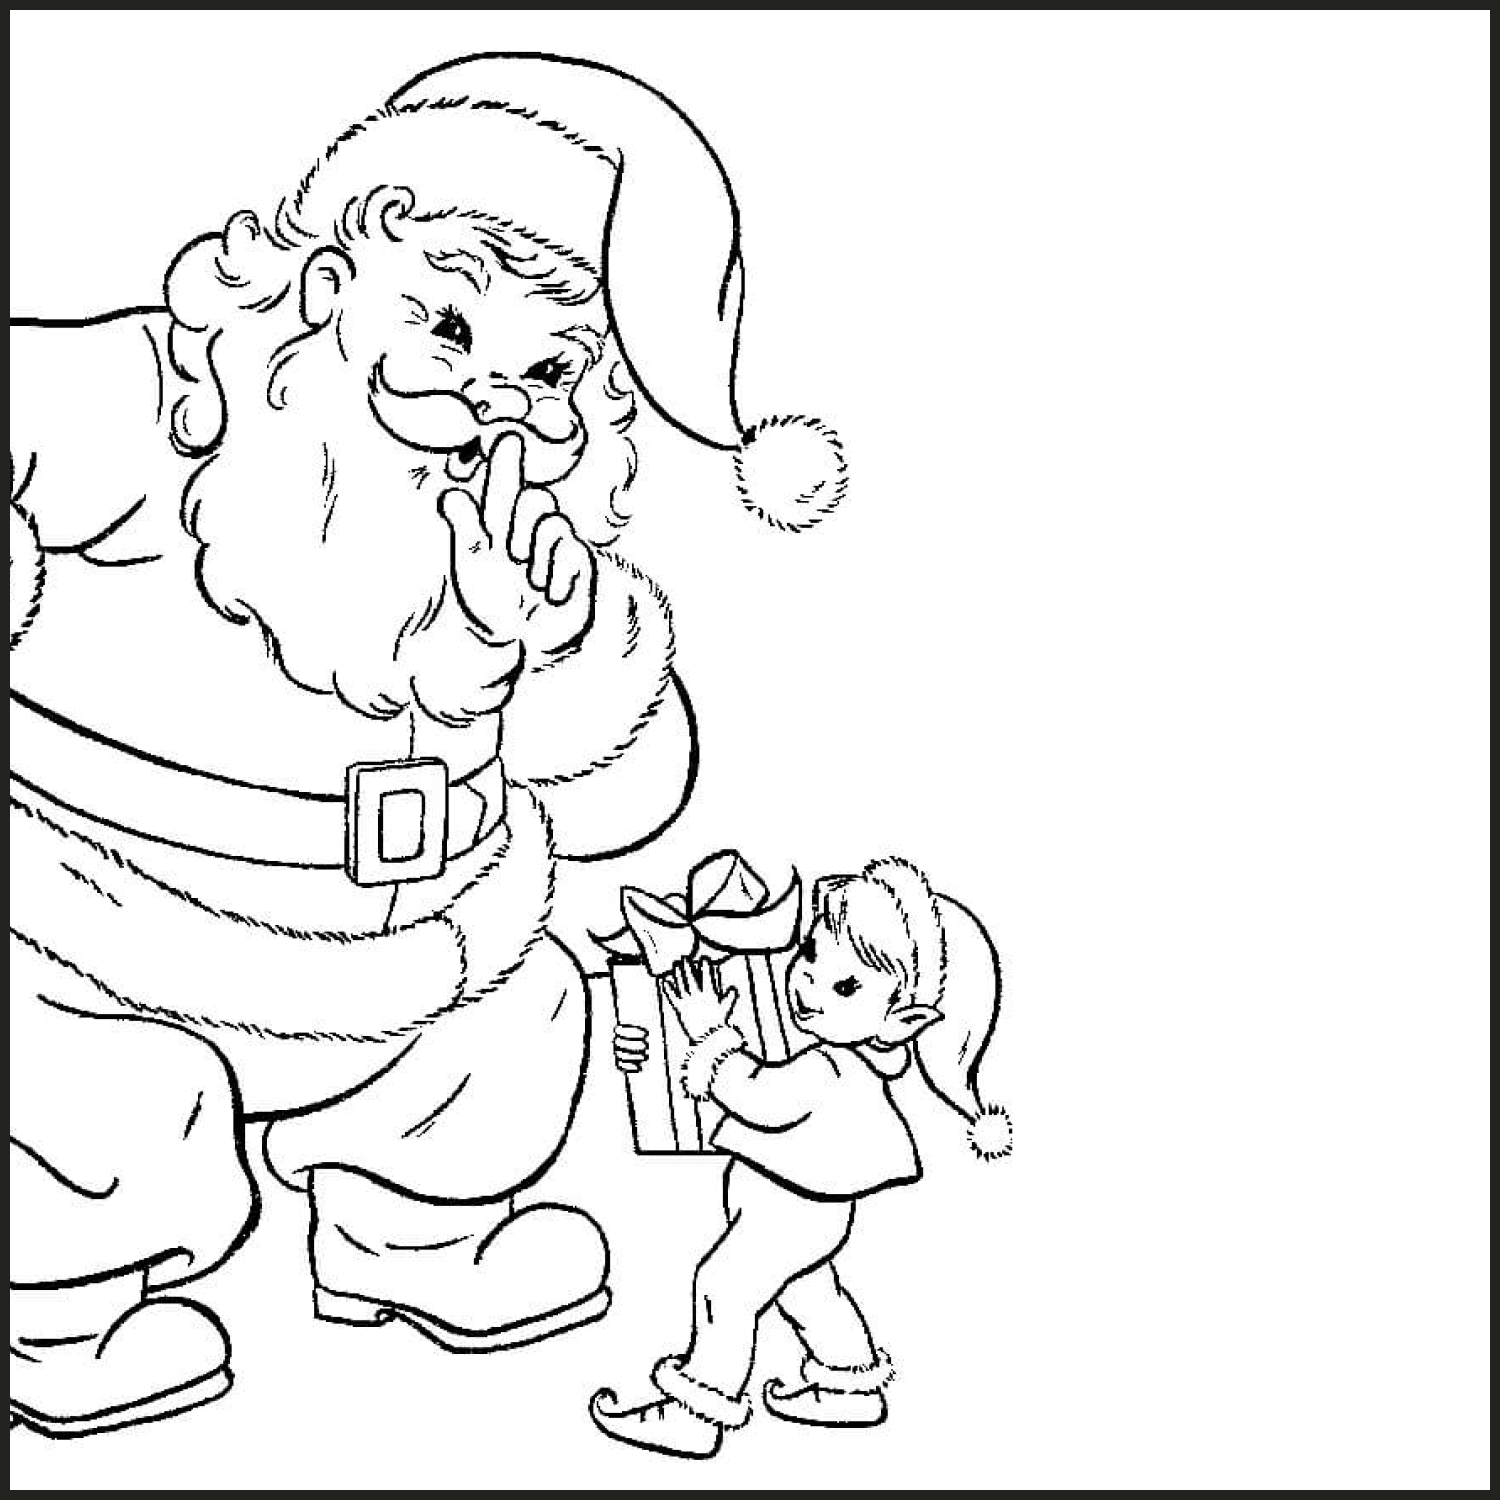 Santa with Christmas gifts coloring page cover image.